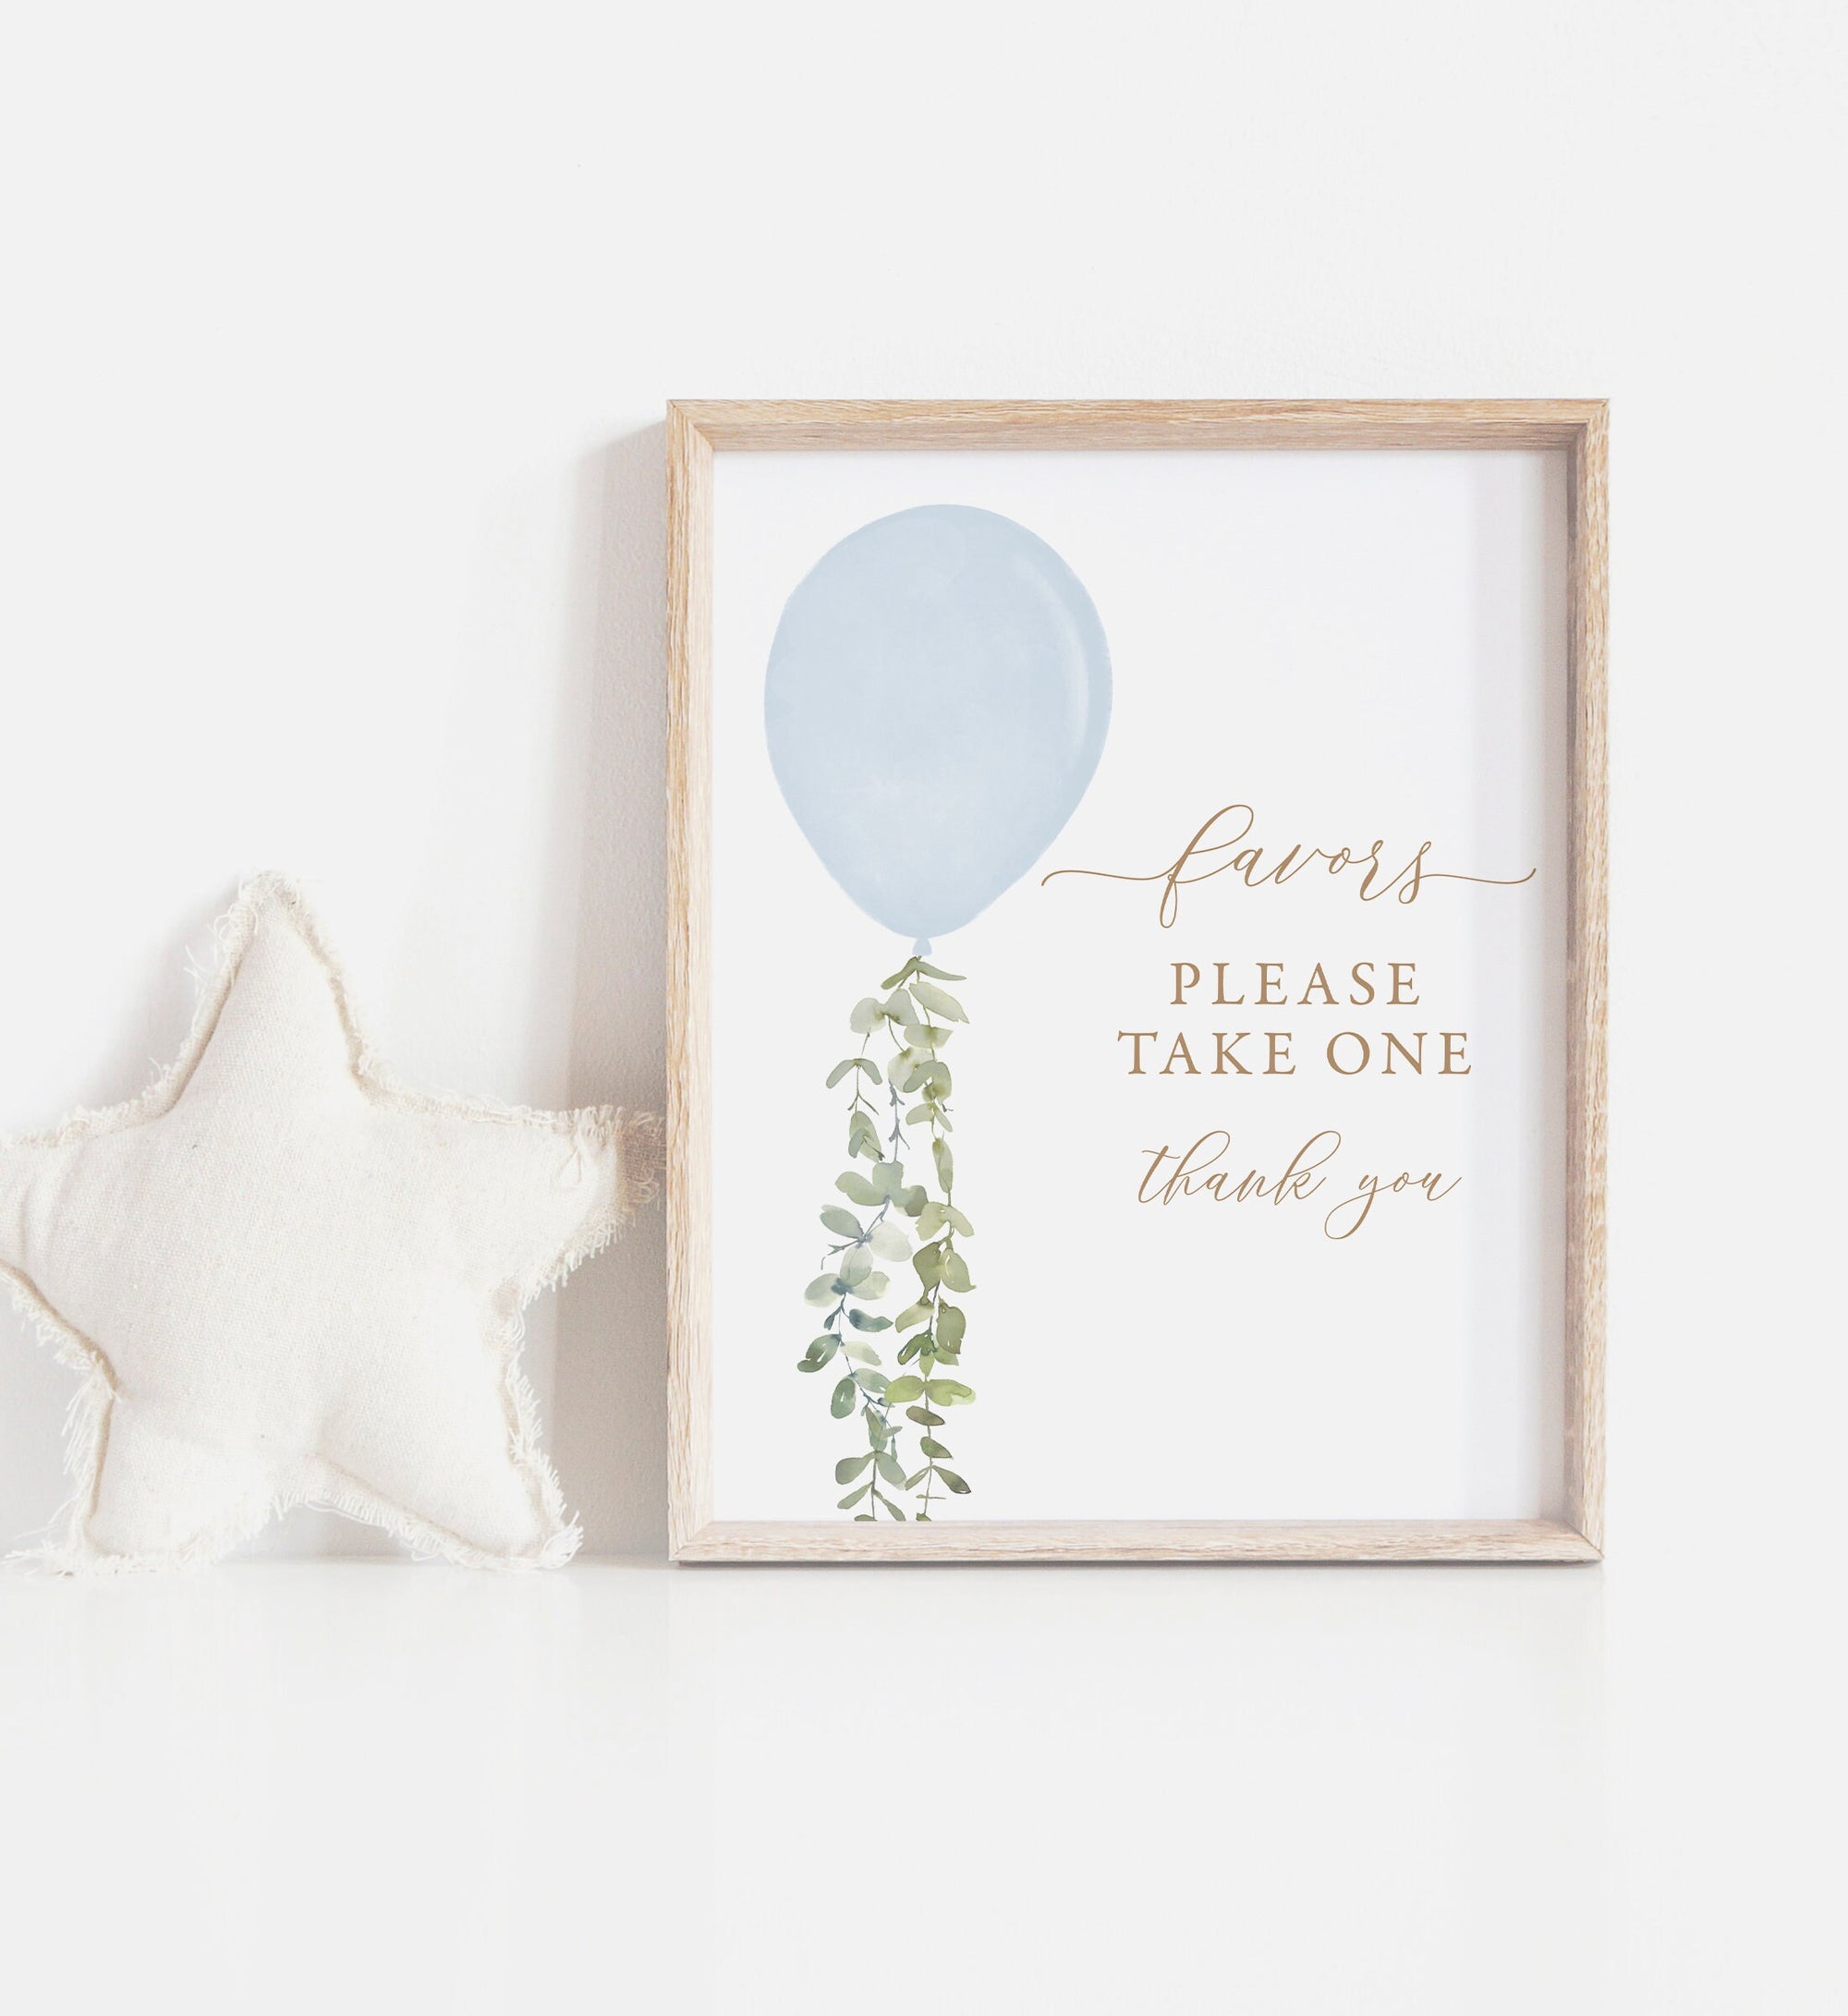 Blue Balloon Baby Shower Favors Sign, Watercolor Balloon, Favors Please Take One, Printable Baby Shower Favors Sign, DIGITAL DOWNLOAD